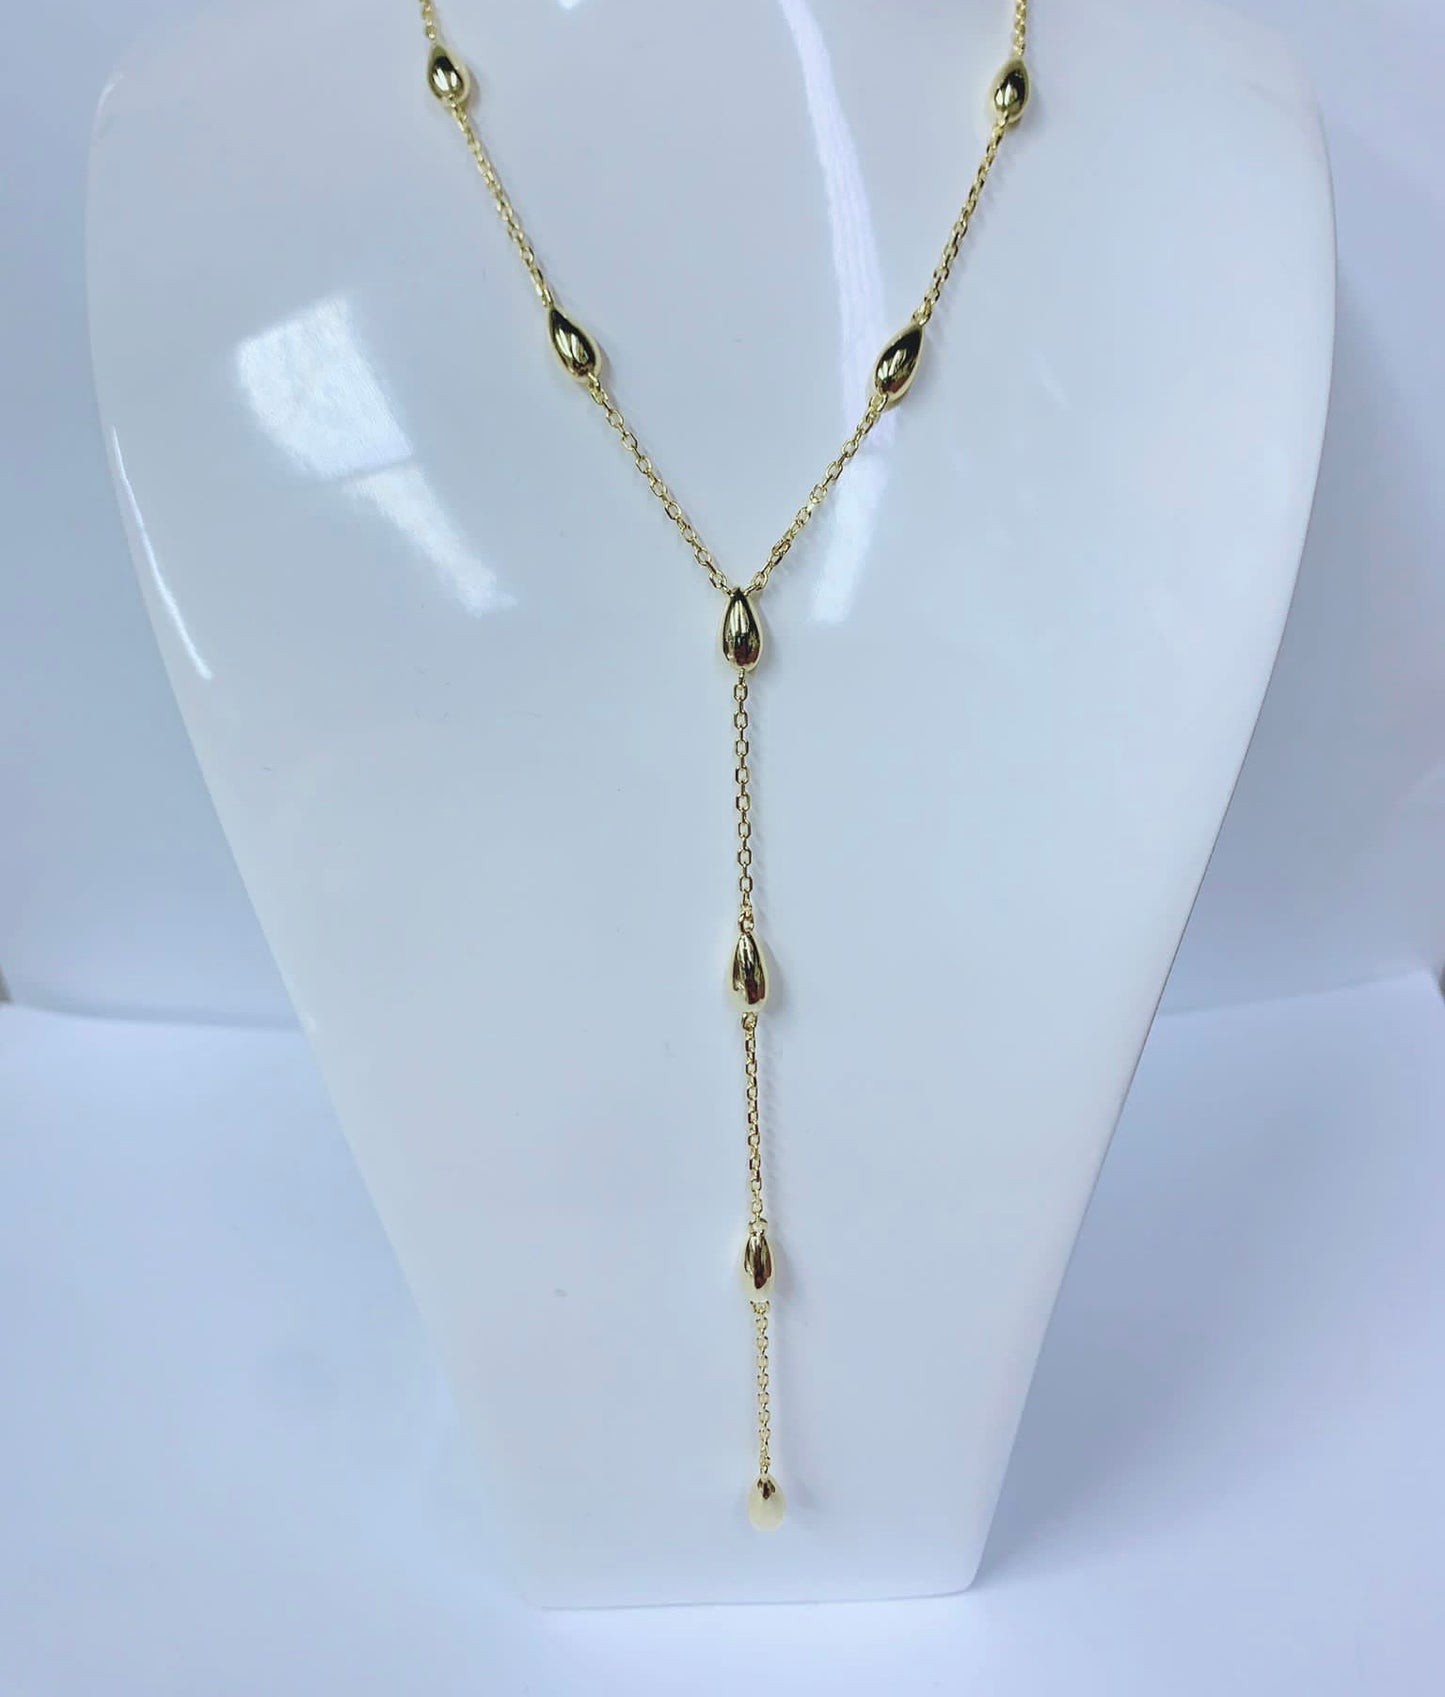 Lariat necklace with drops